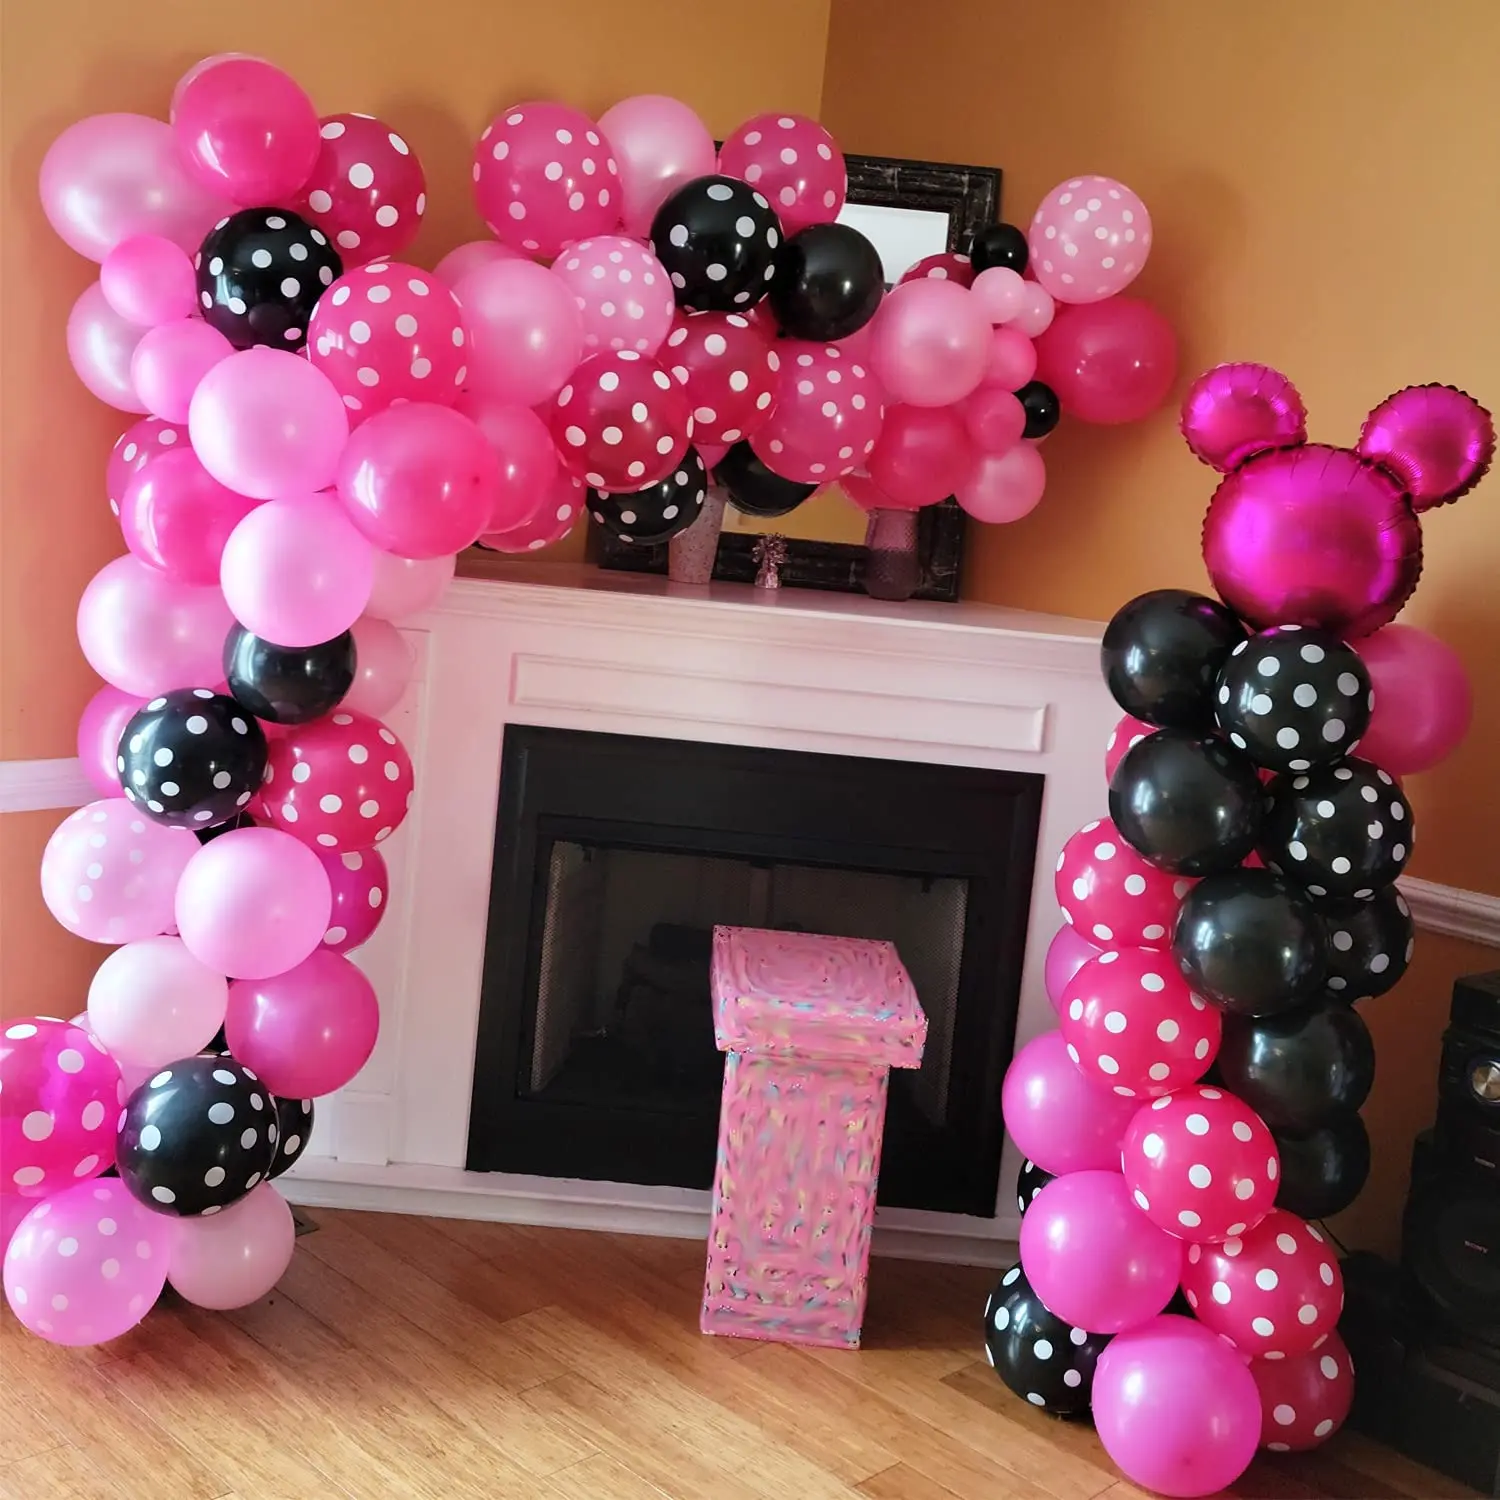 

115pcs Minnie Mouse Party Balloon Garland Arch Kit Pink Black Balloons for Girls Birthday Party Baby Shower Decoration Supplies